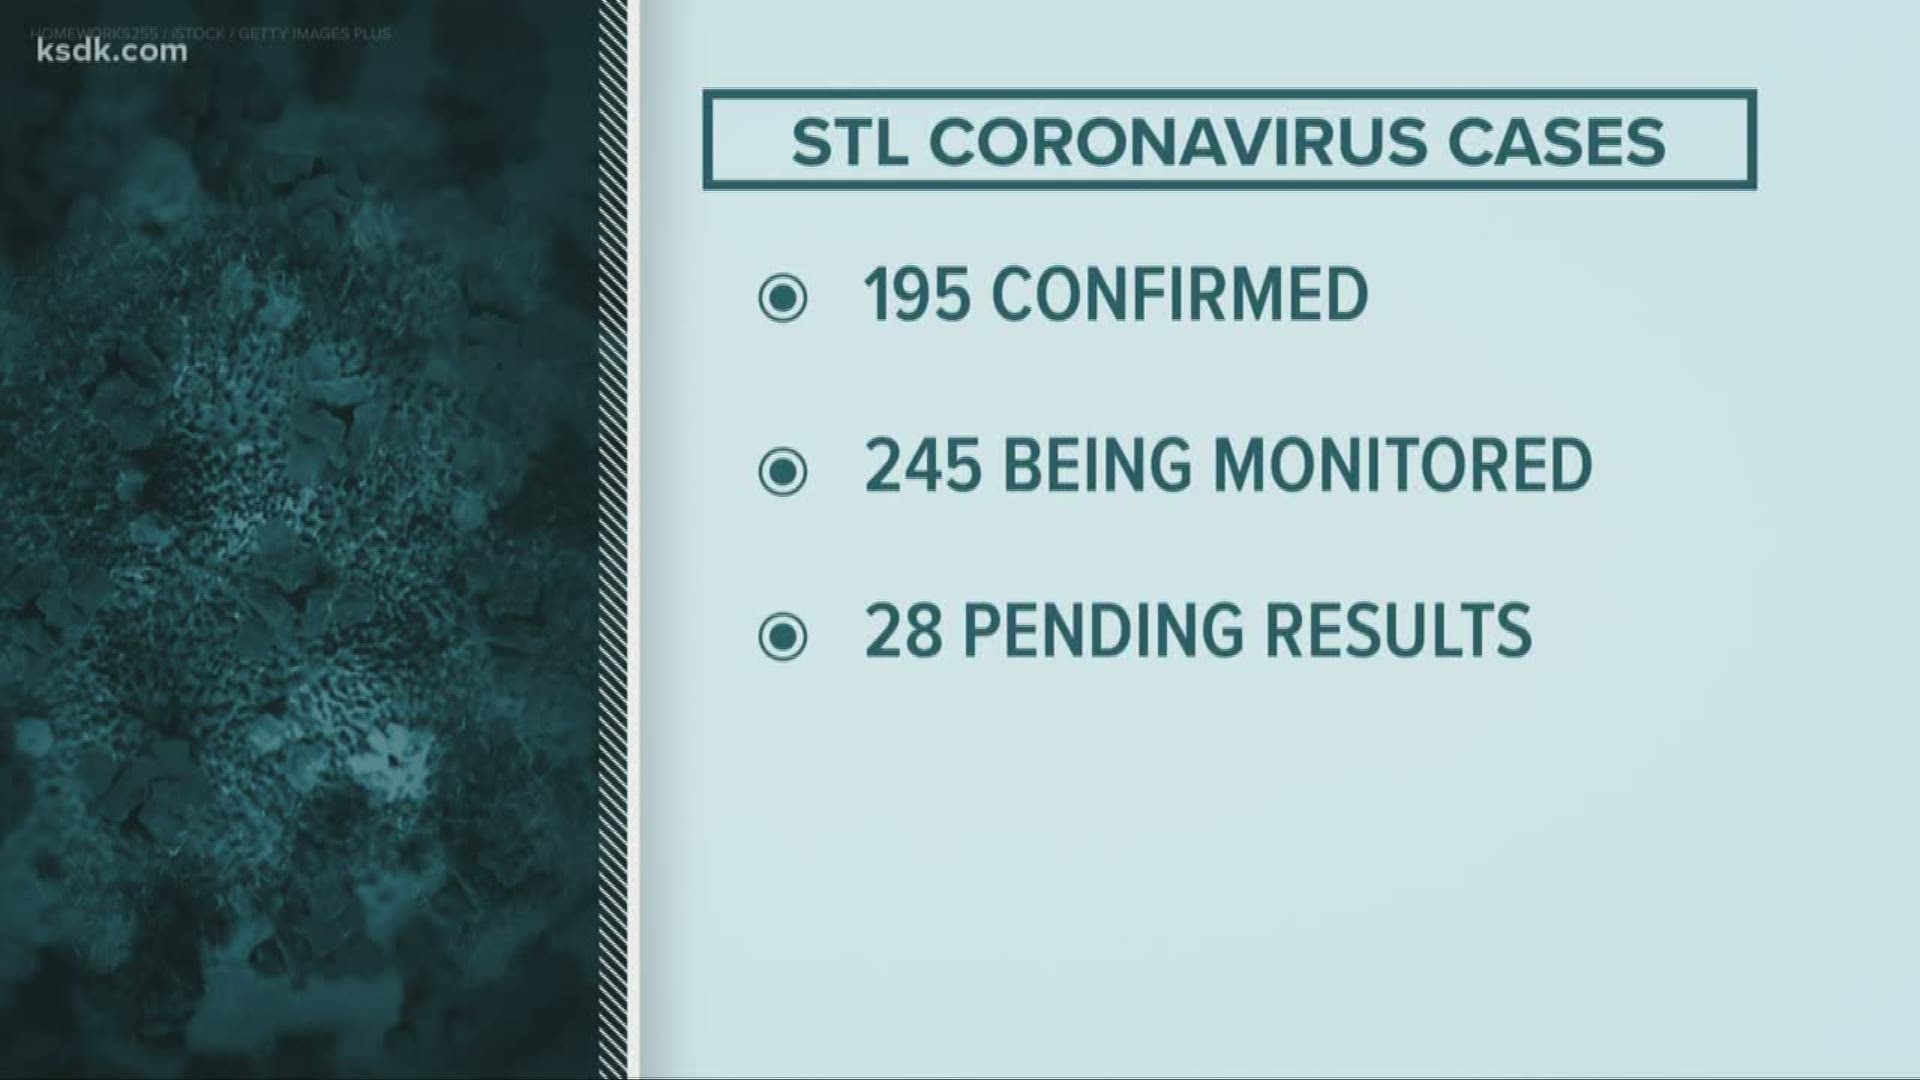 St. Louis city, county to report coronavirus cases by zipcode | mediakits.theygsgroup.com